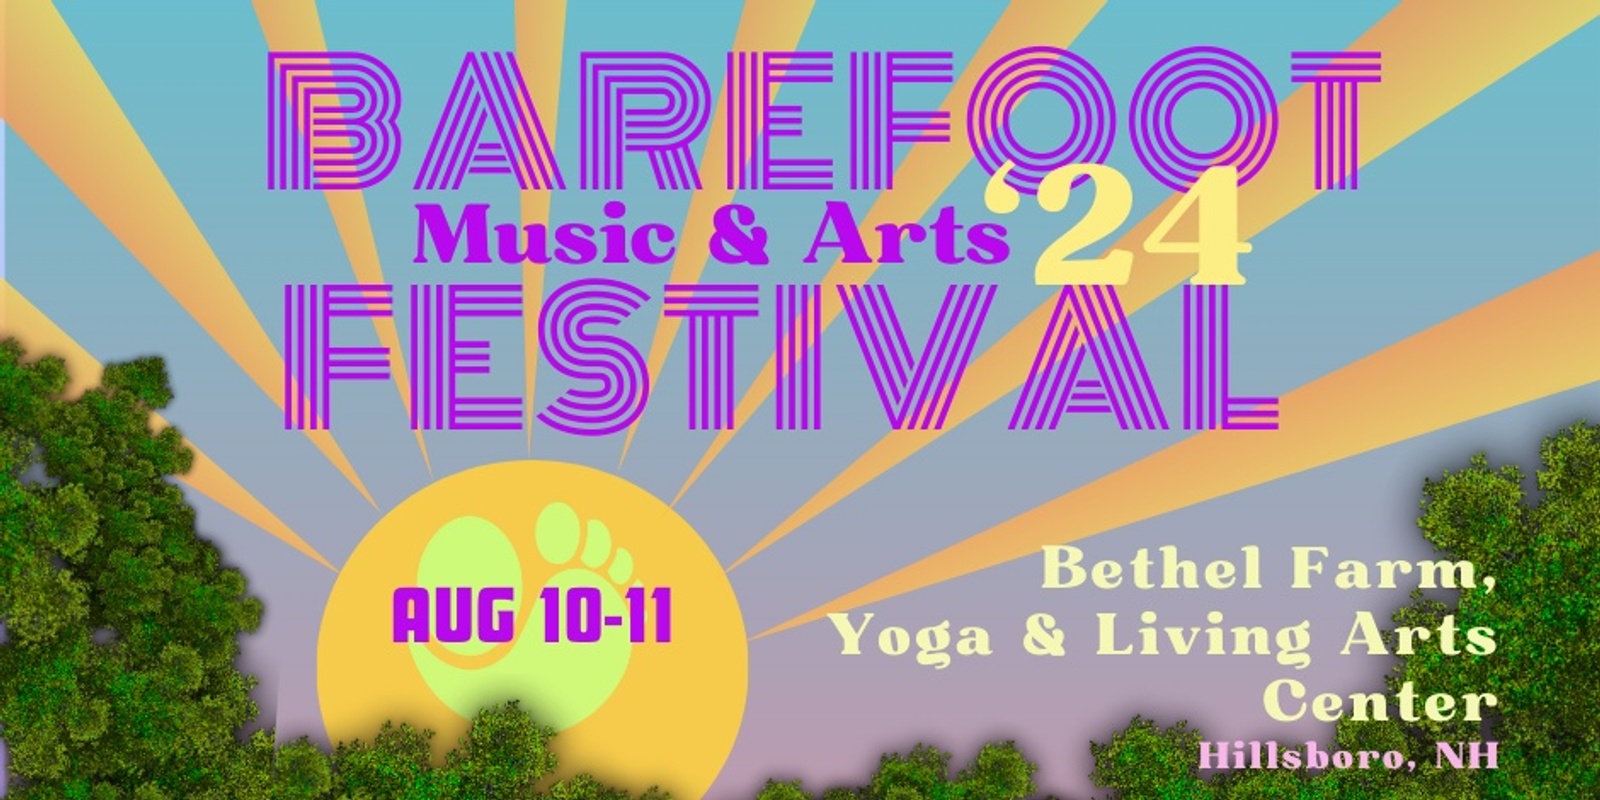 Banner image for Barefoot Music and Arts Festival